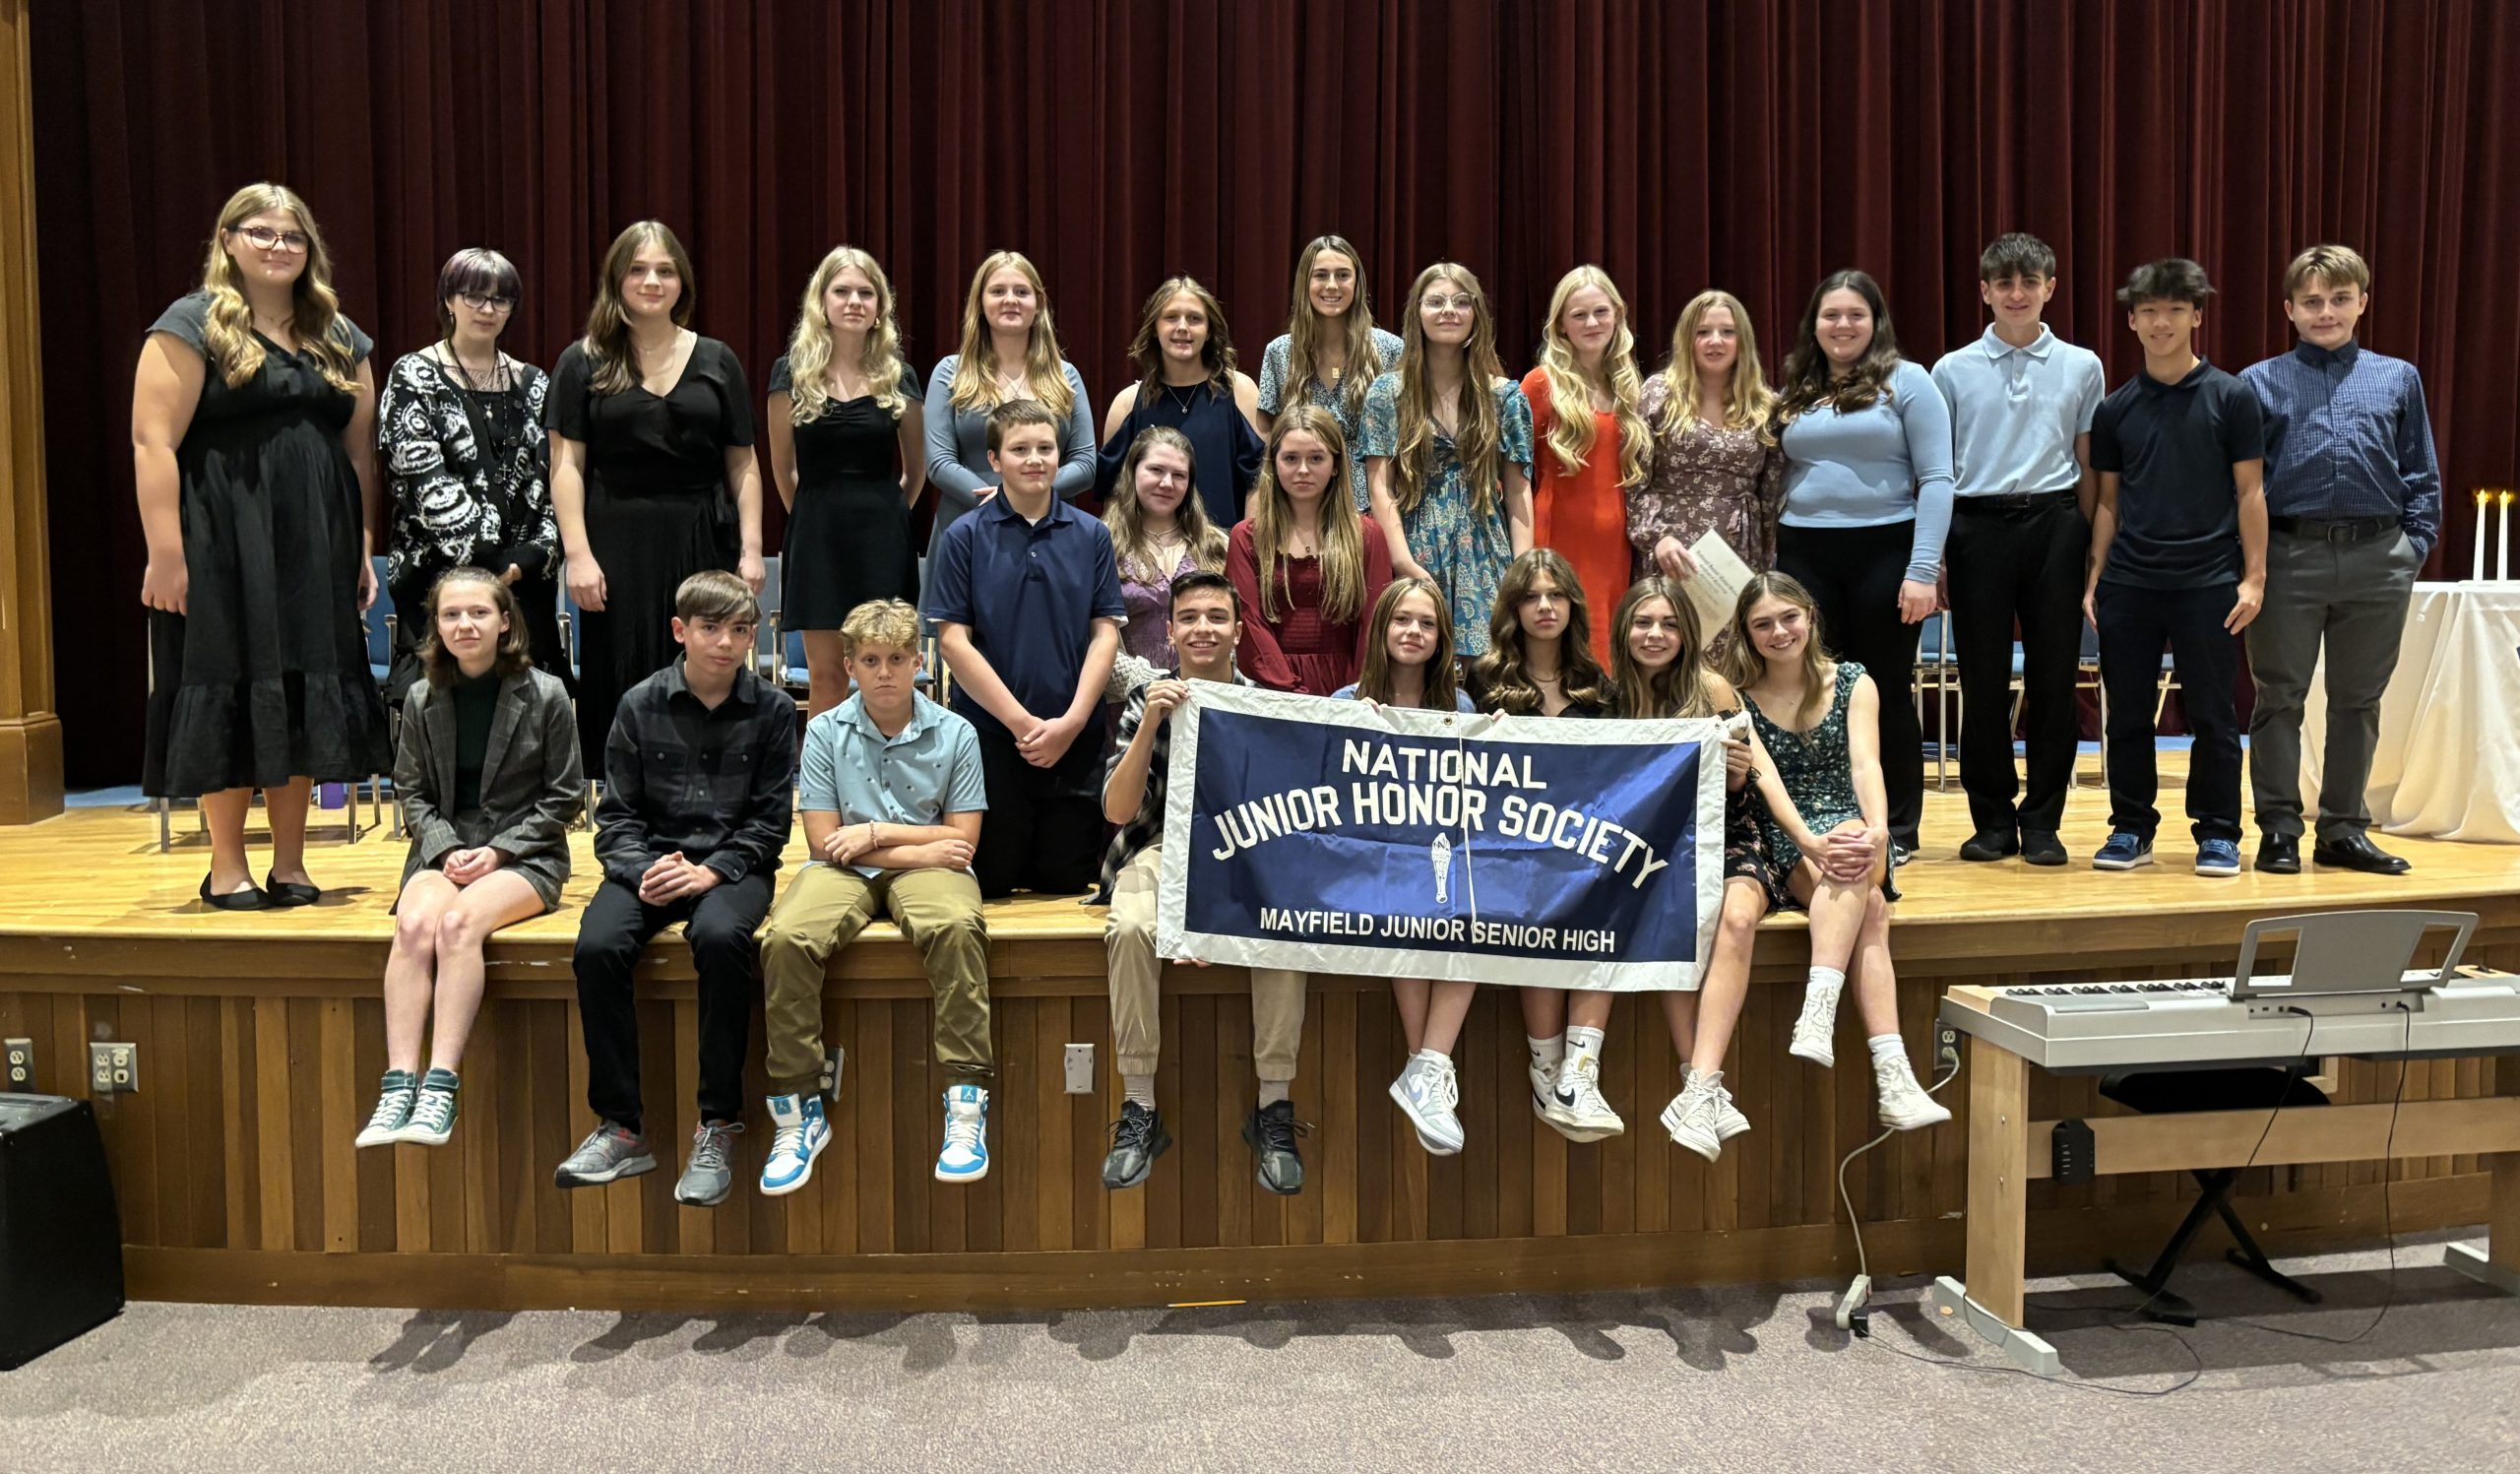 students stand in a row on stage while another row of students sits on the edge of the stage holding a sign saying National Junior Honor Society